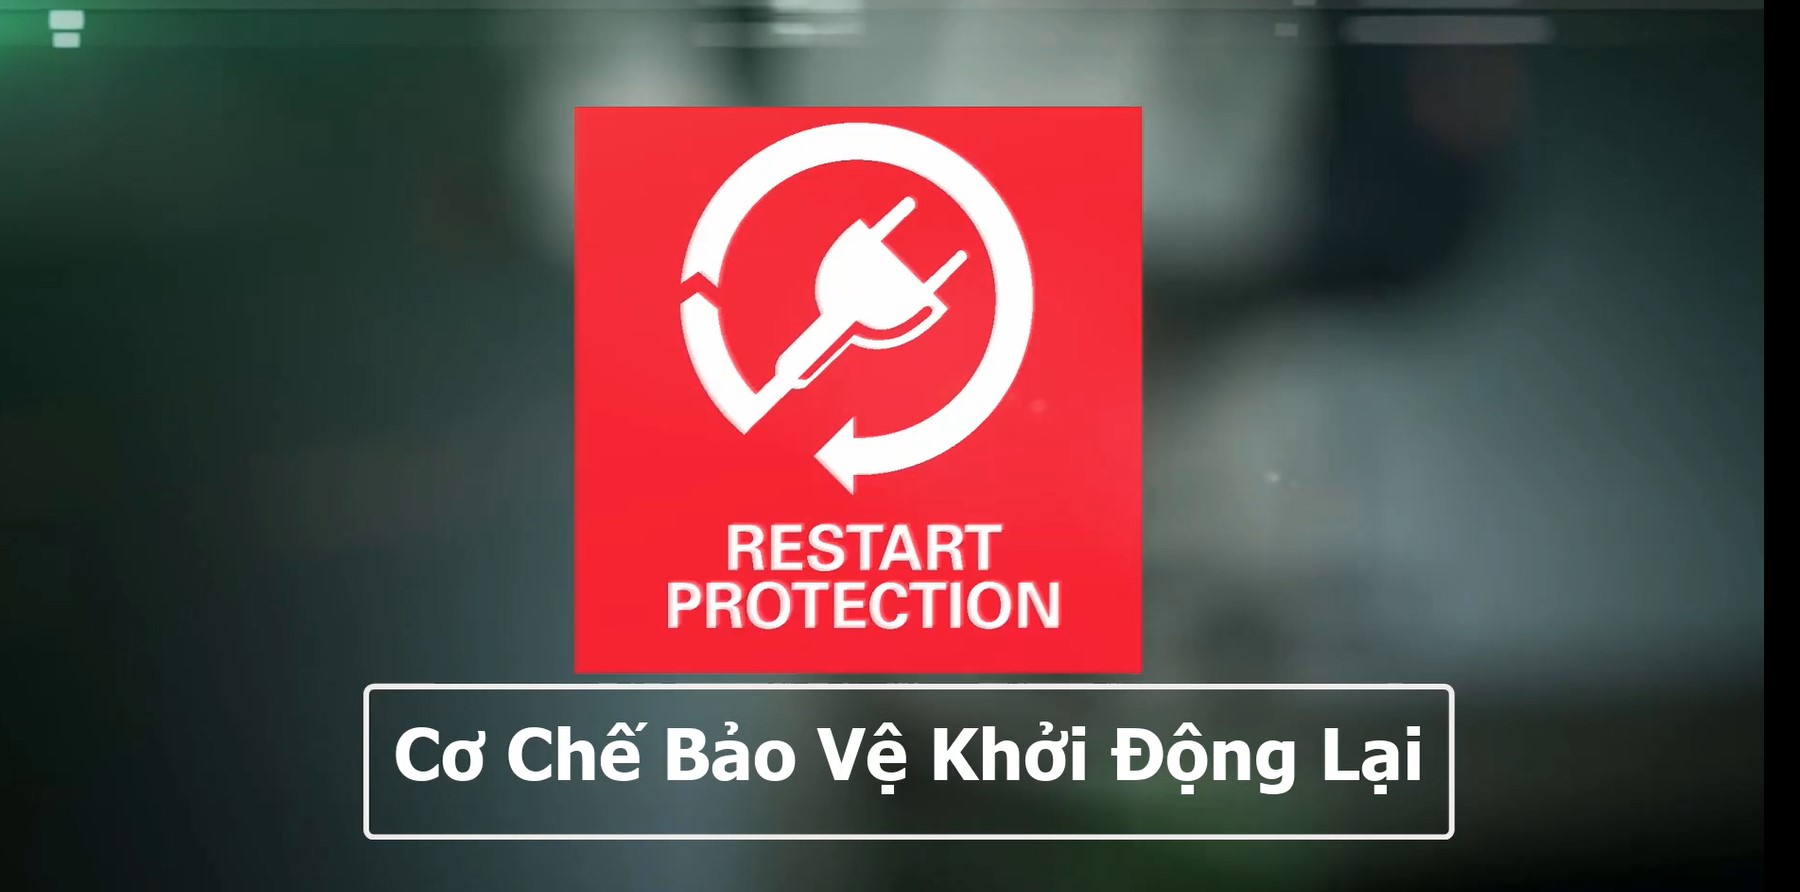 Cong-nghe-bao-ve-khoi-dong-lai-dung-cu-dien-Metabo